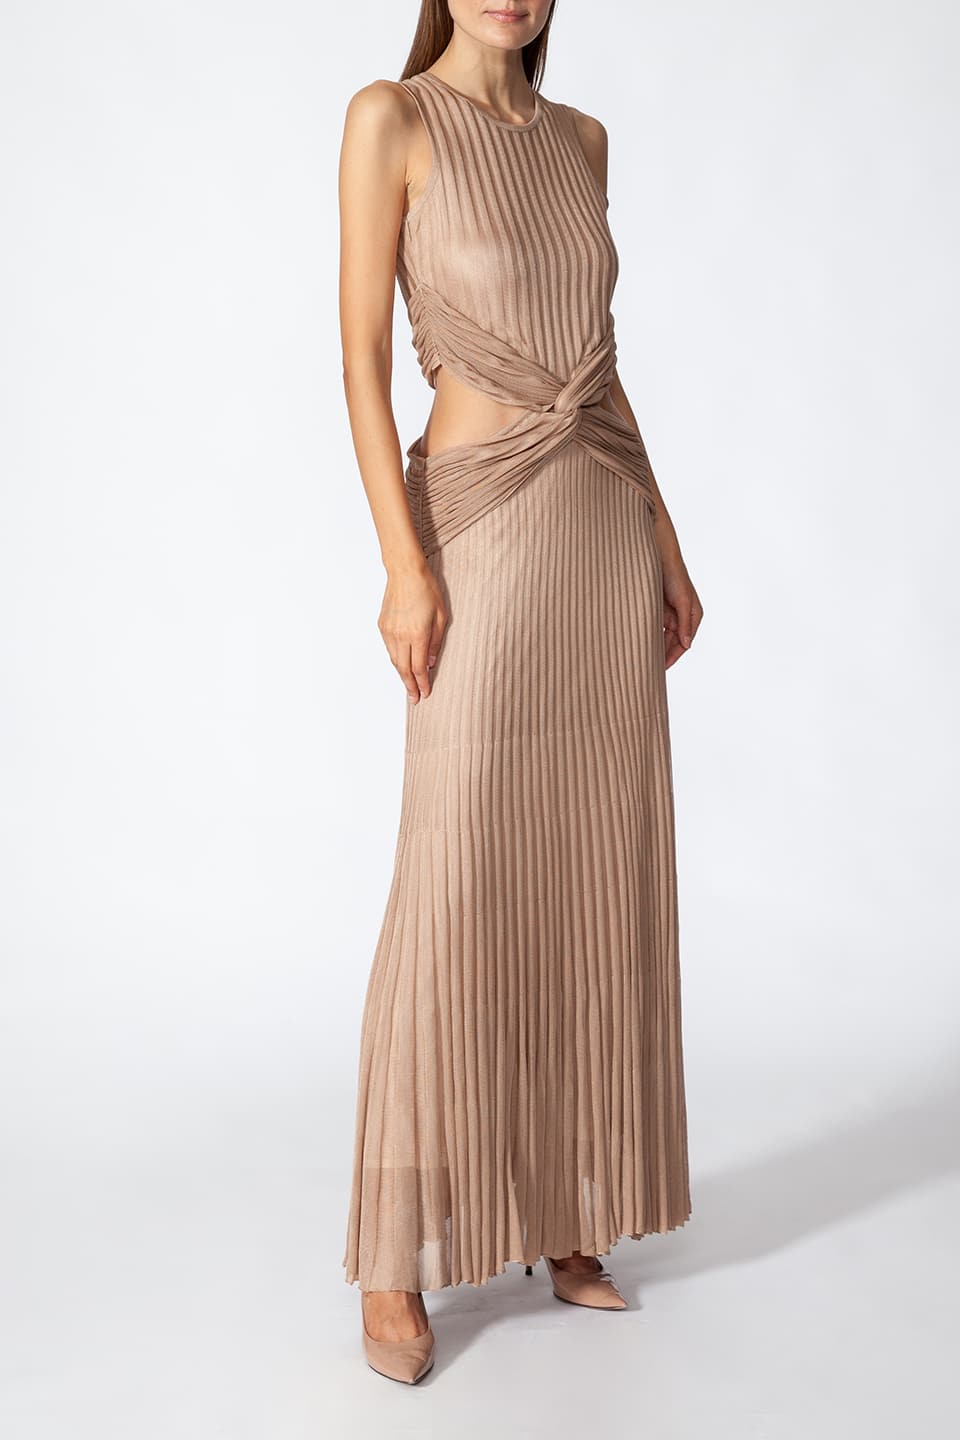 Model in pose for front - side view, wearing Fashion Stylist Kukhareva London's elegant gold dress. Long evening dress crafted from gold viscose blend featuring round neckline.